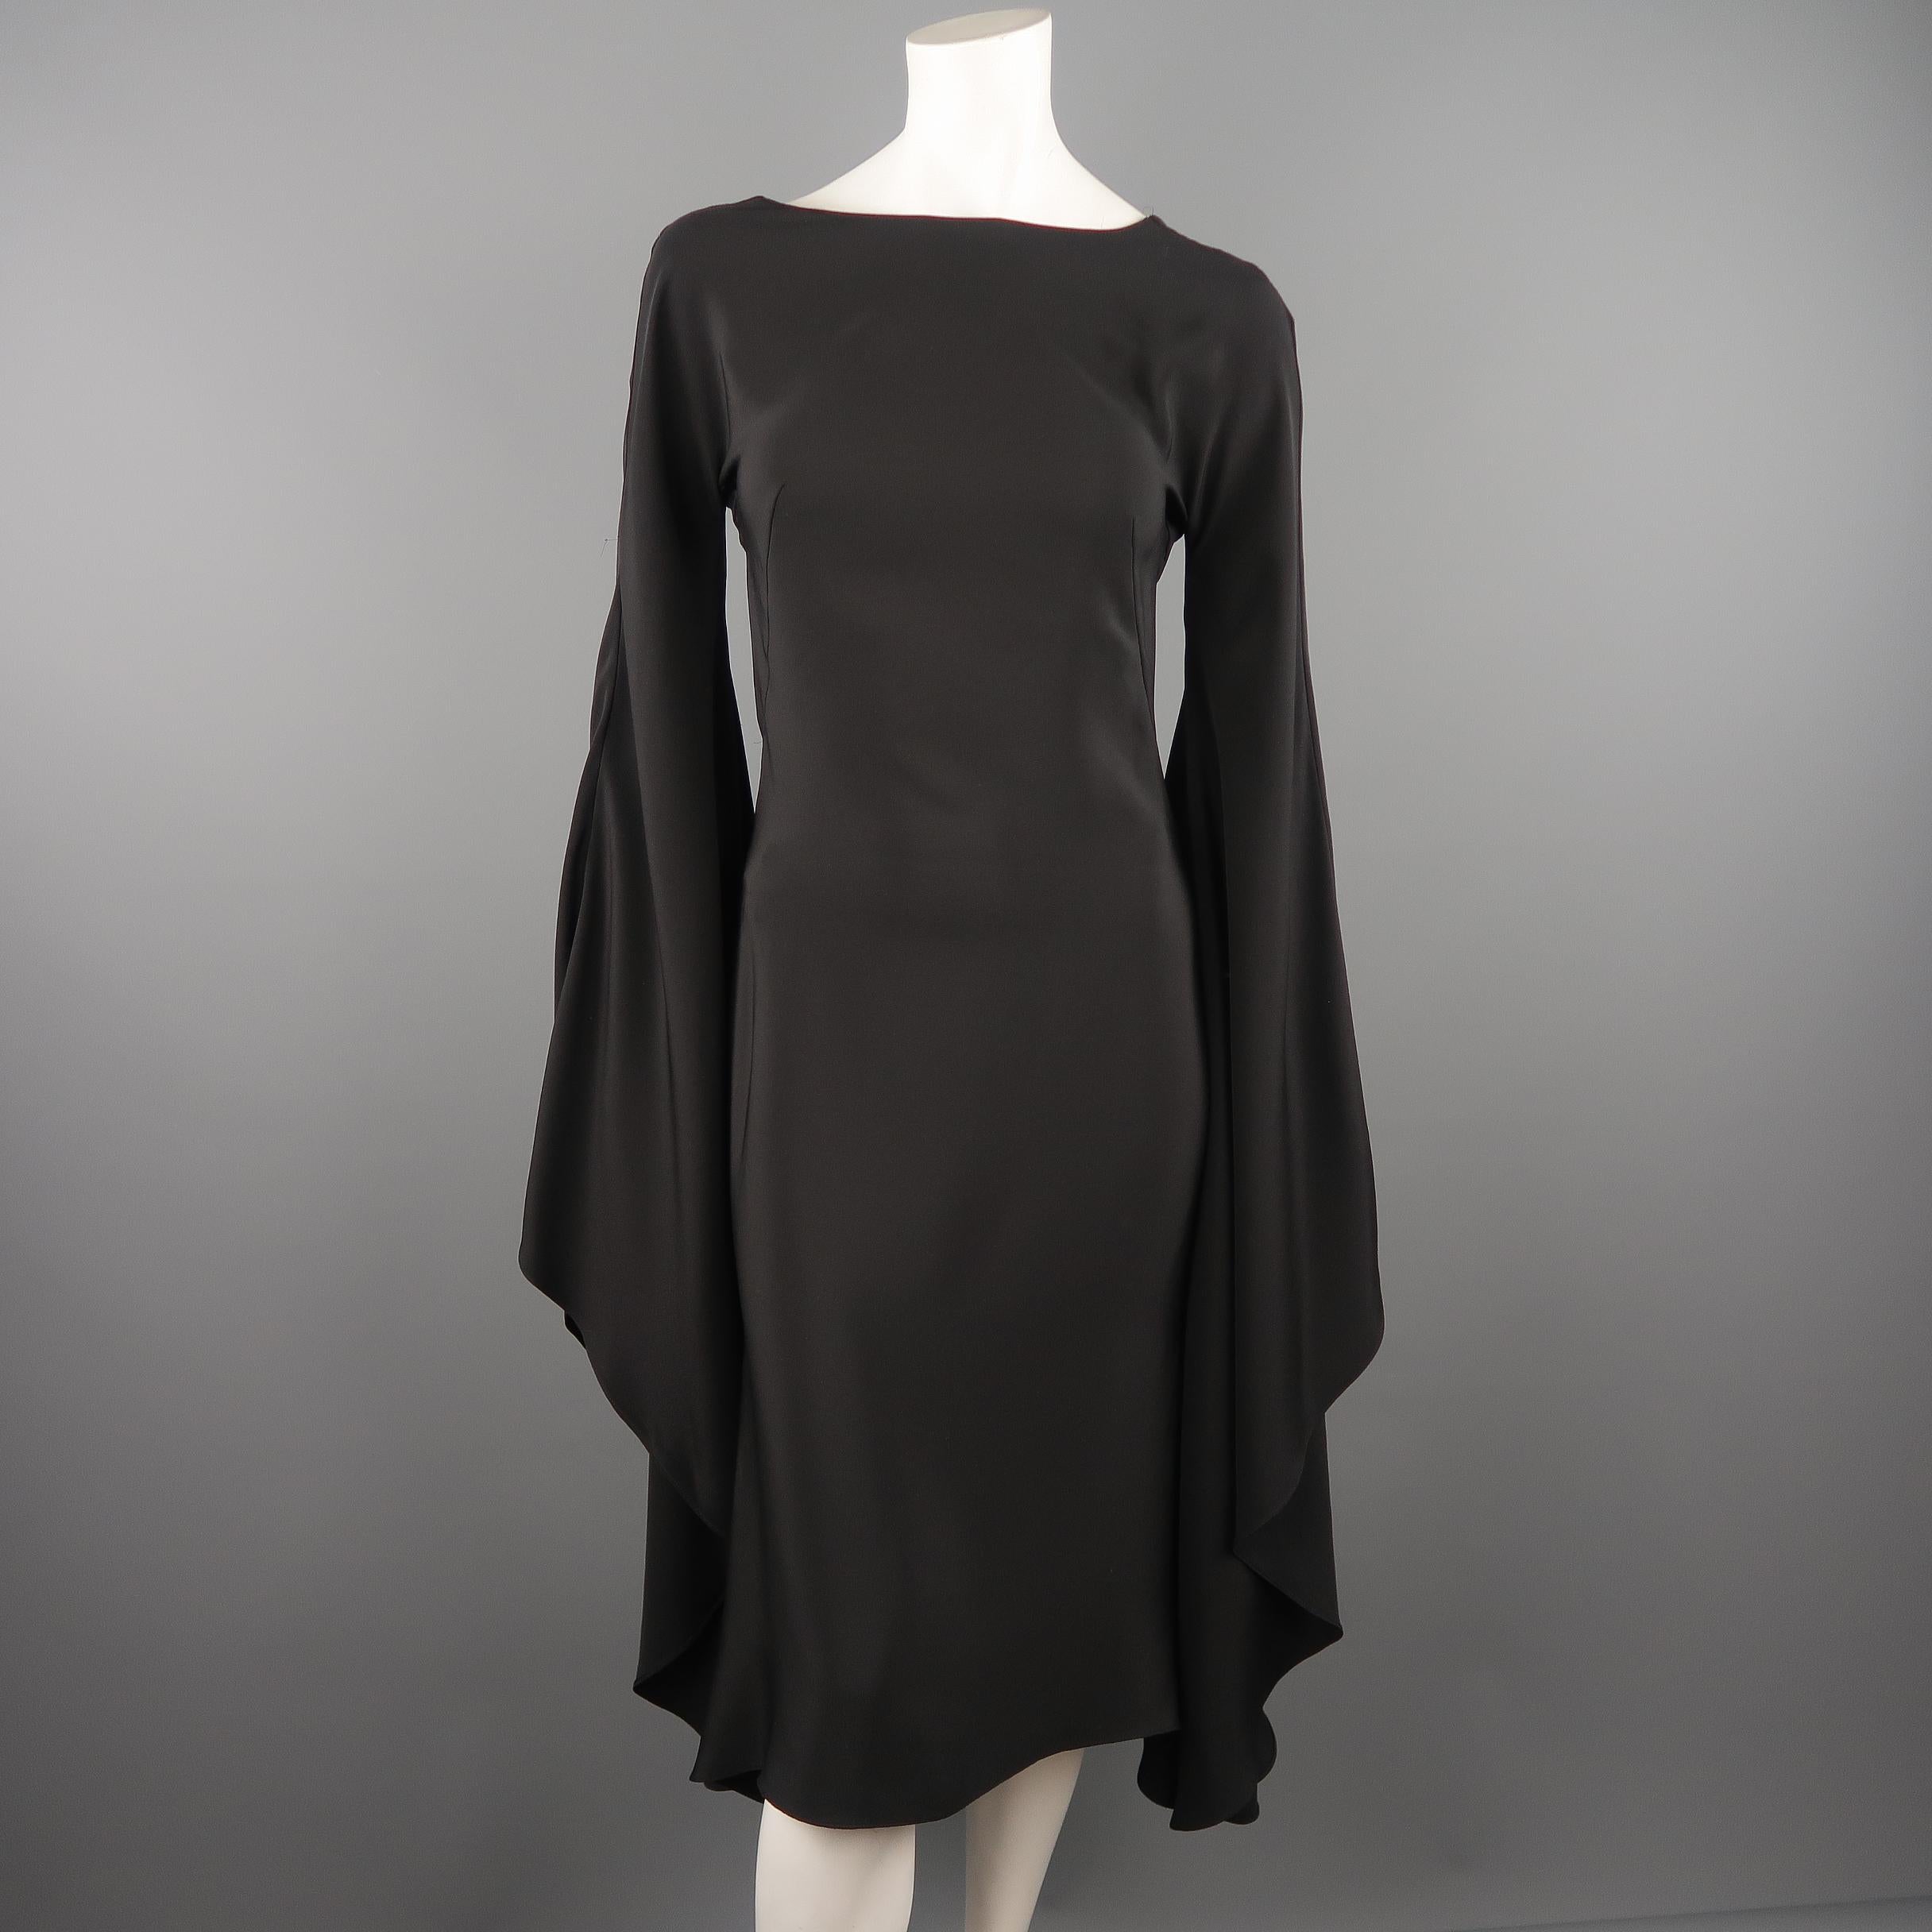 Iconic TOM FORD - Spring 2013 Runway Size 4 Black Silk Open Back Cocktail Dress In Excellent Condition In San Francisco, CA